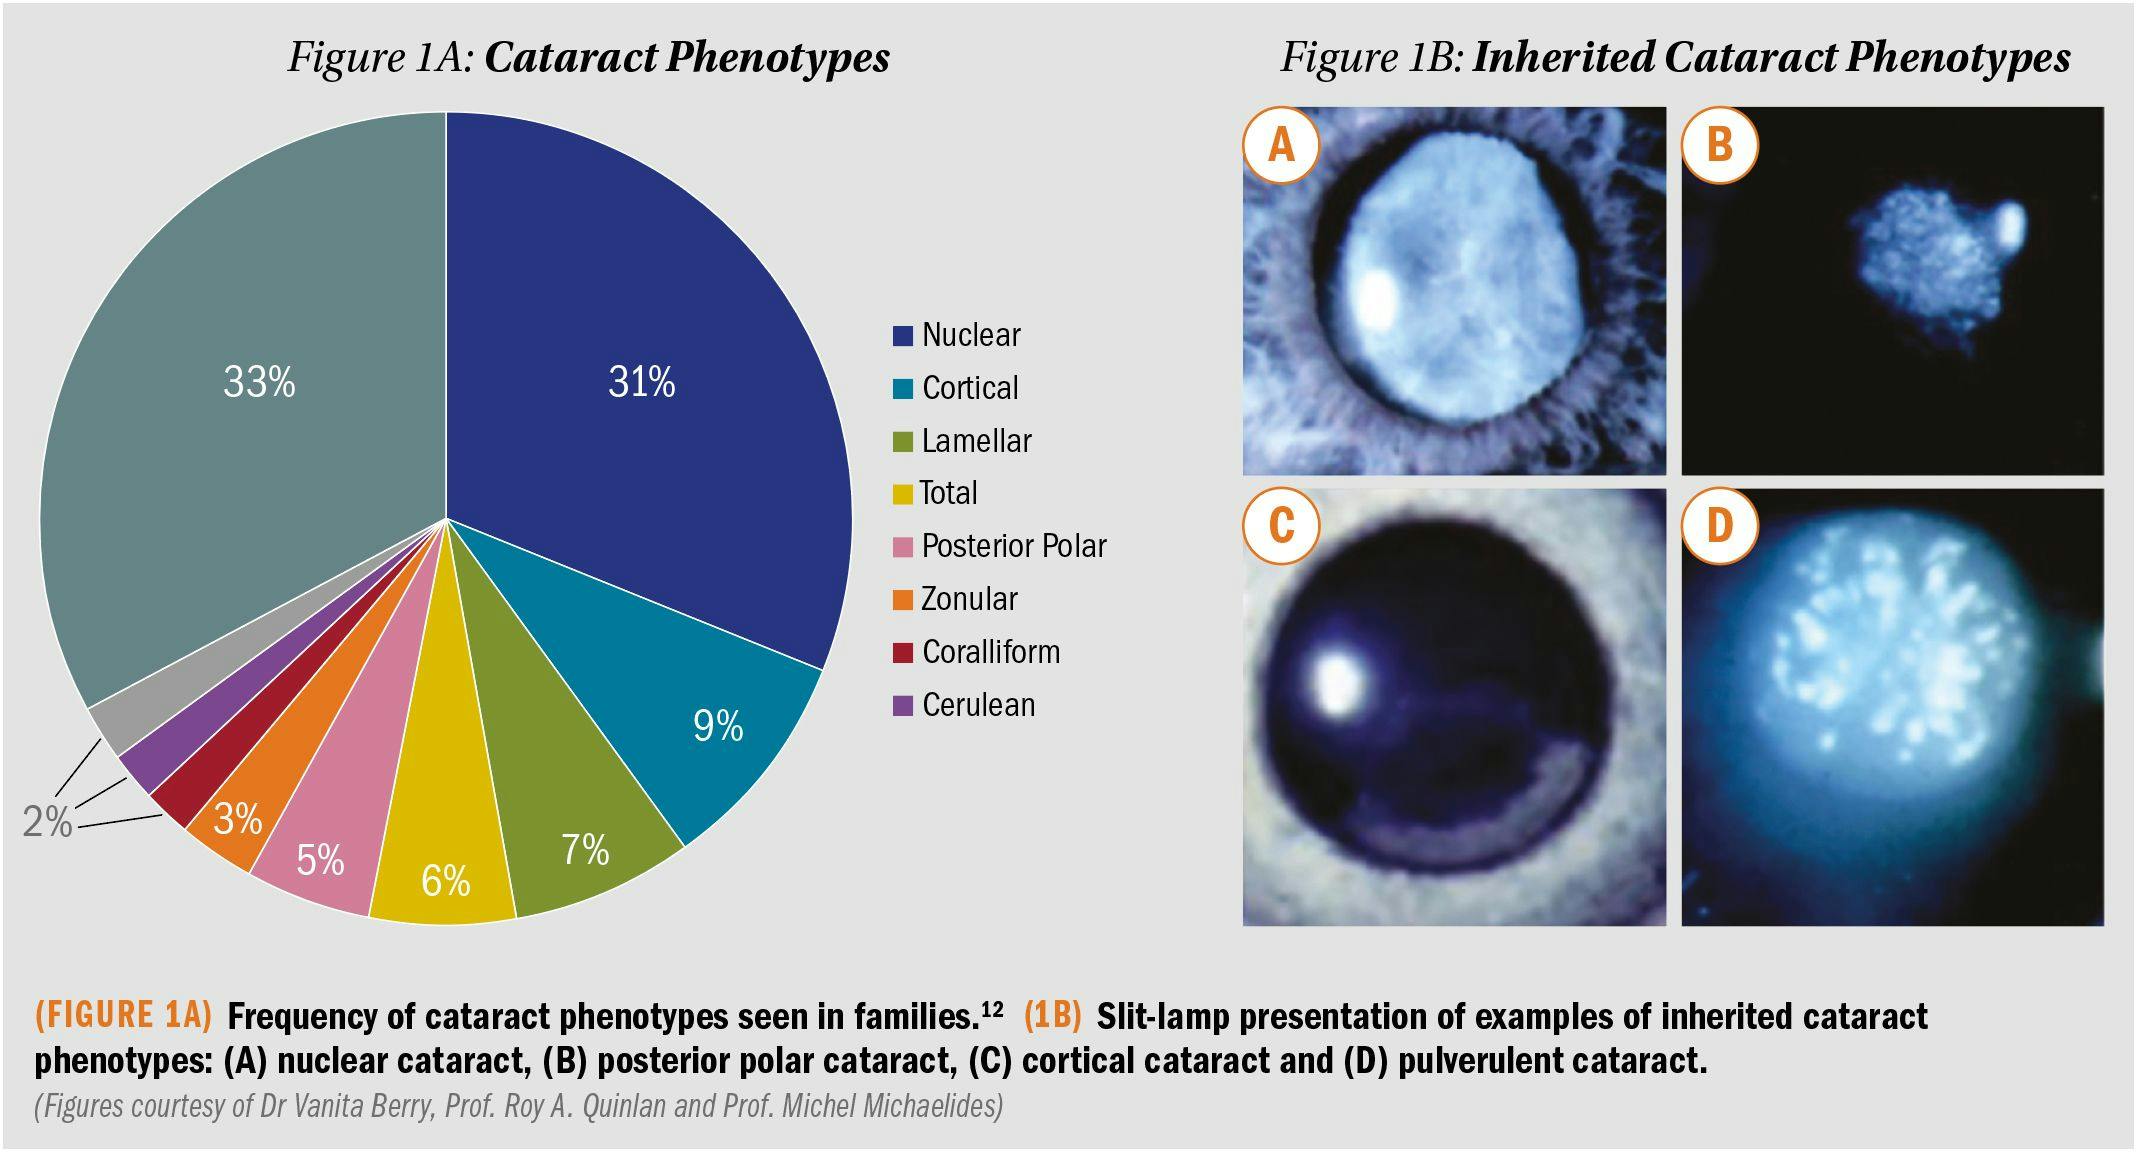 Graph showing cataract phenotypes and photos showing inherited cataract phenotypes